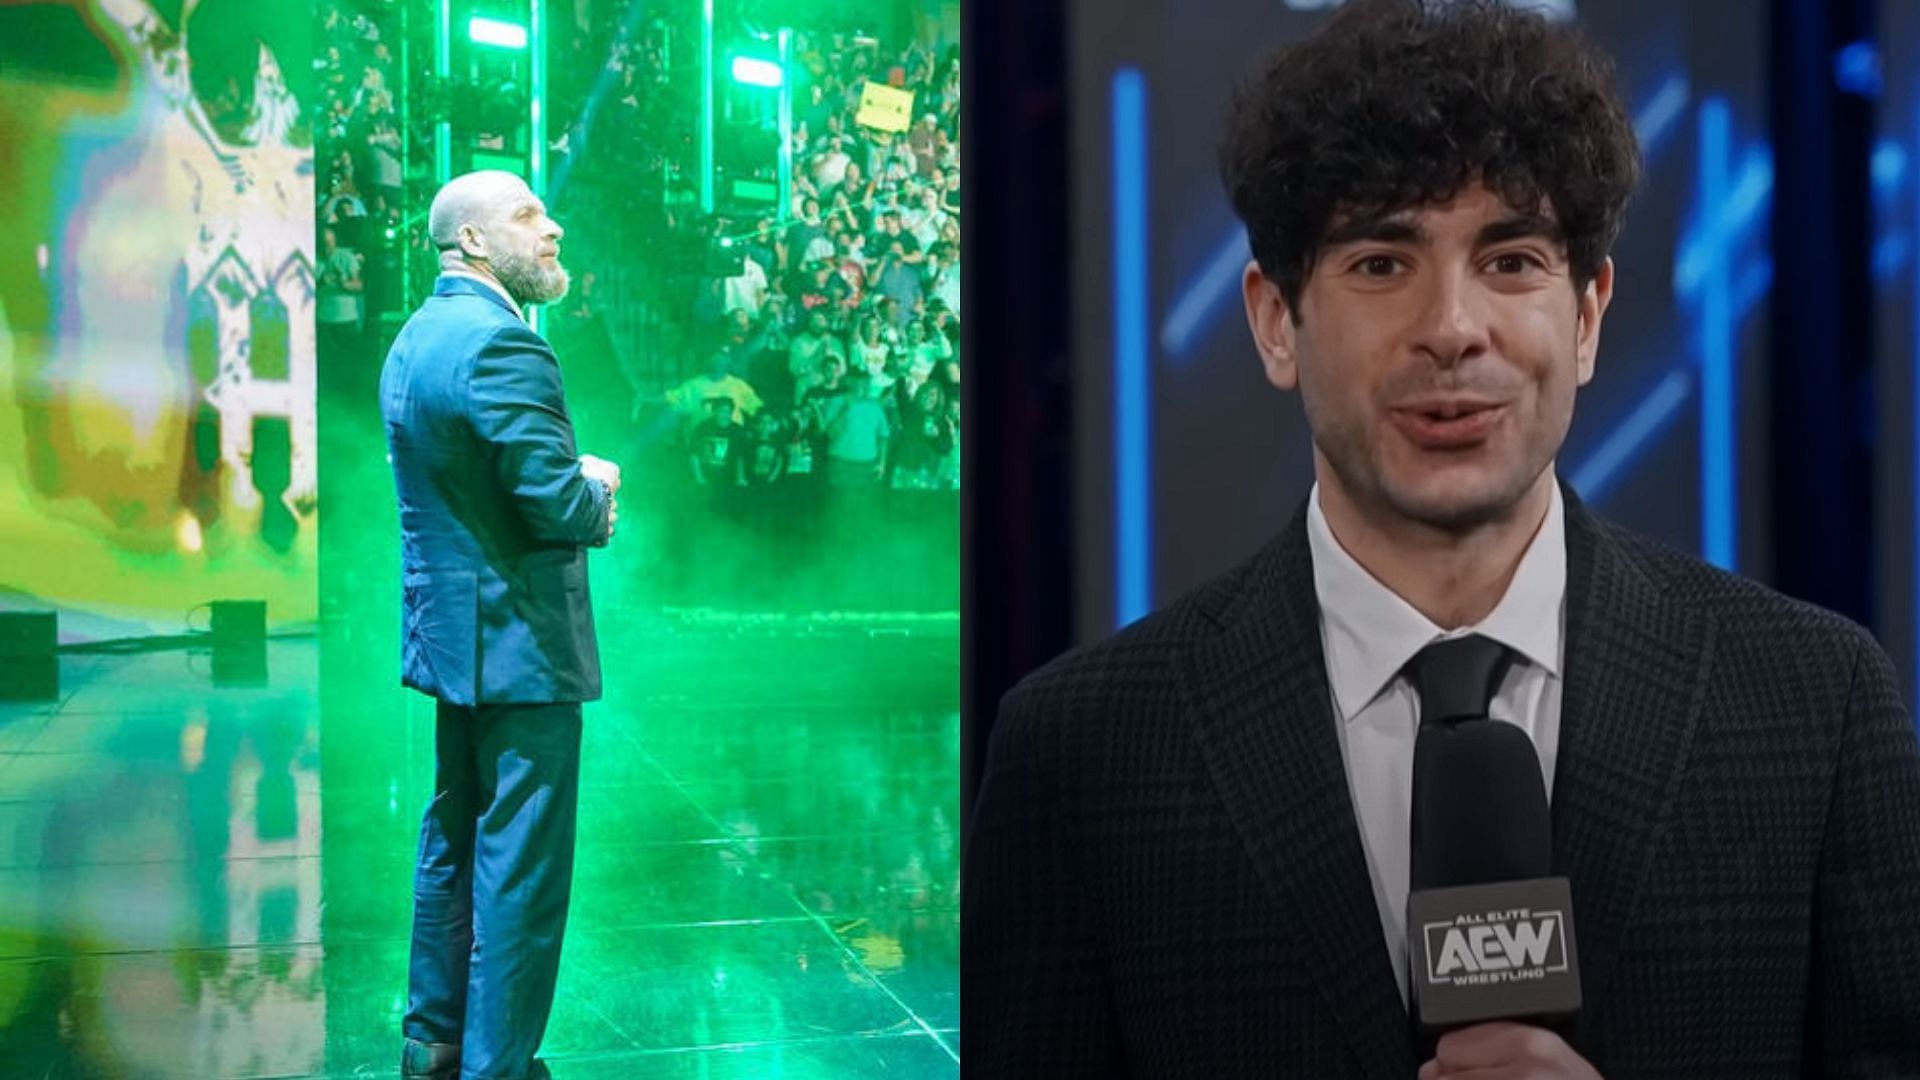 Triple H and Tony Khan are big names in WWE and AEW respectively [Photos courtesy of WWE Official Website and AEW